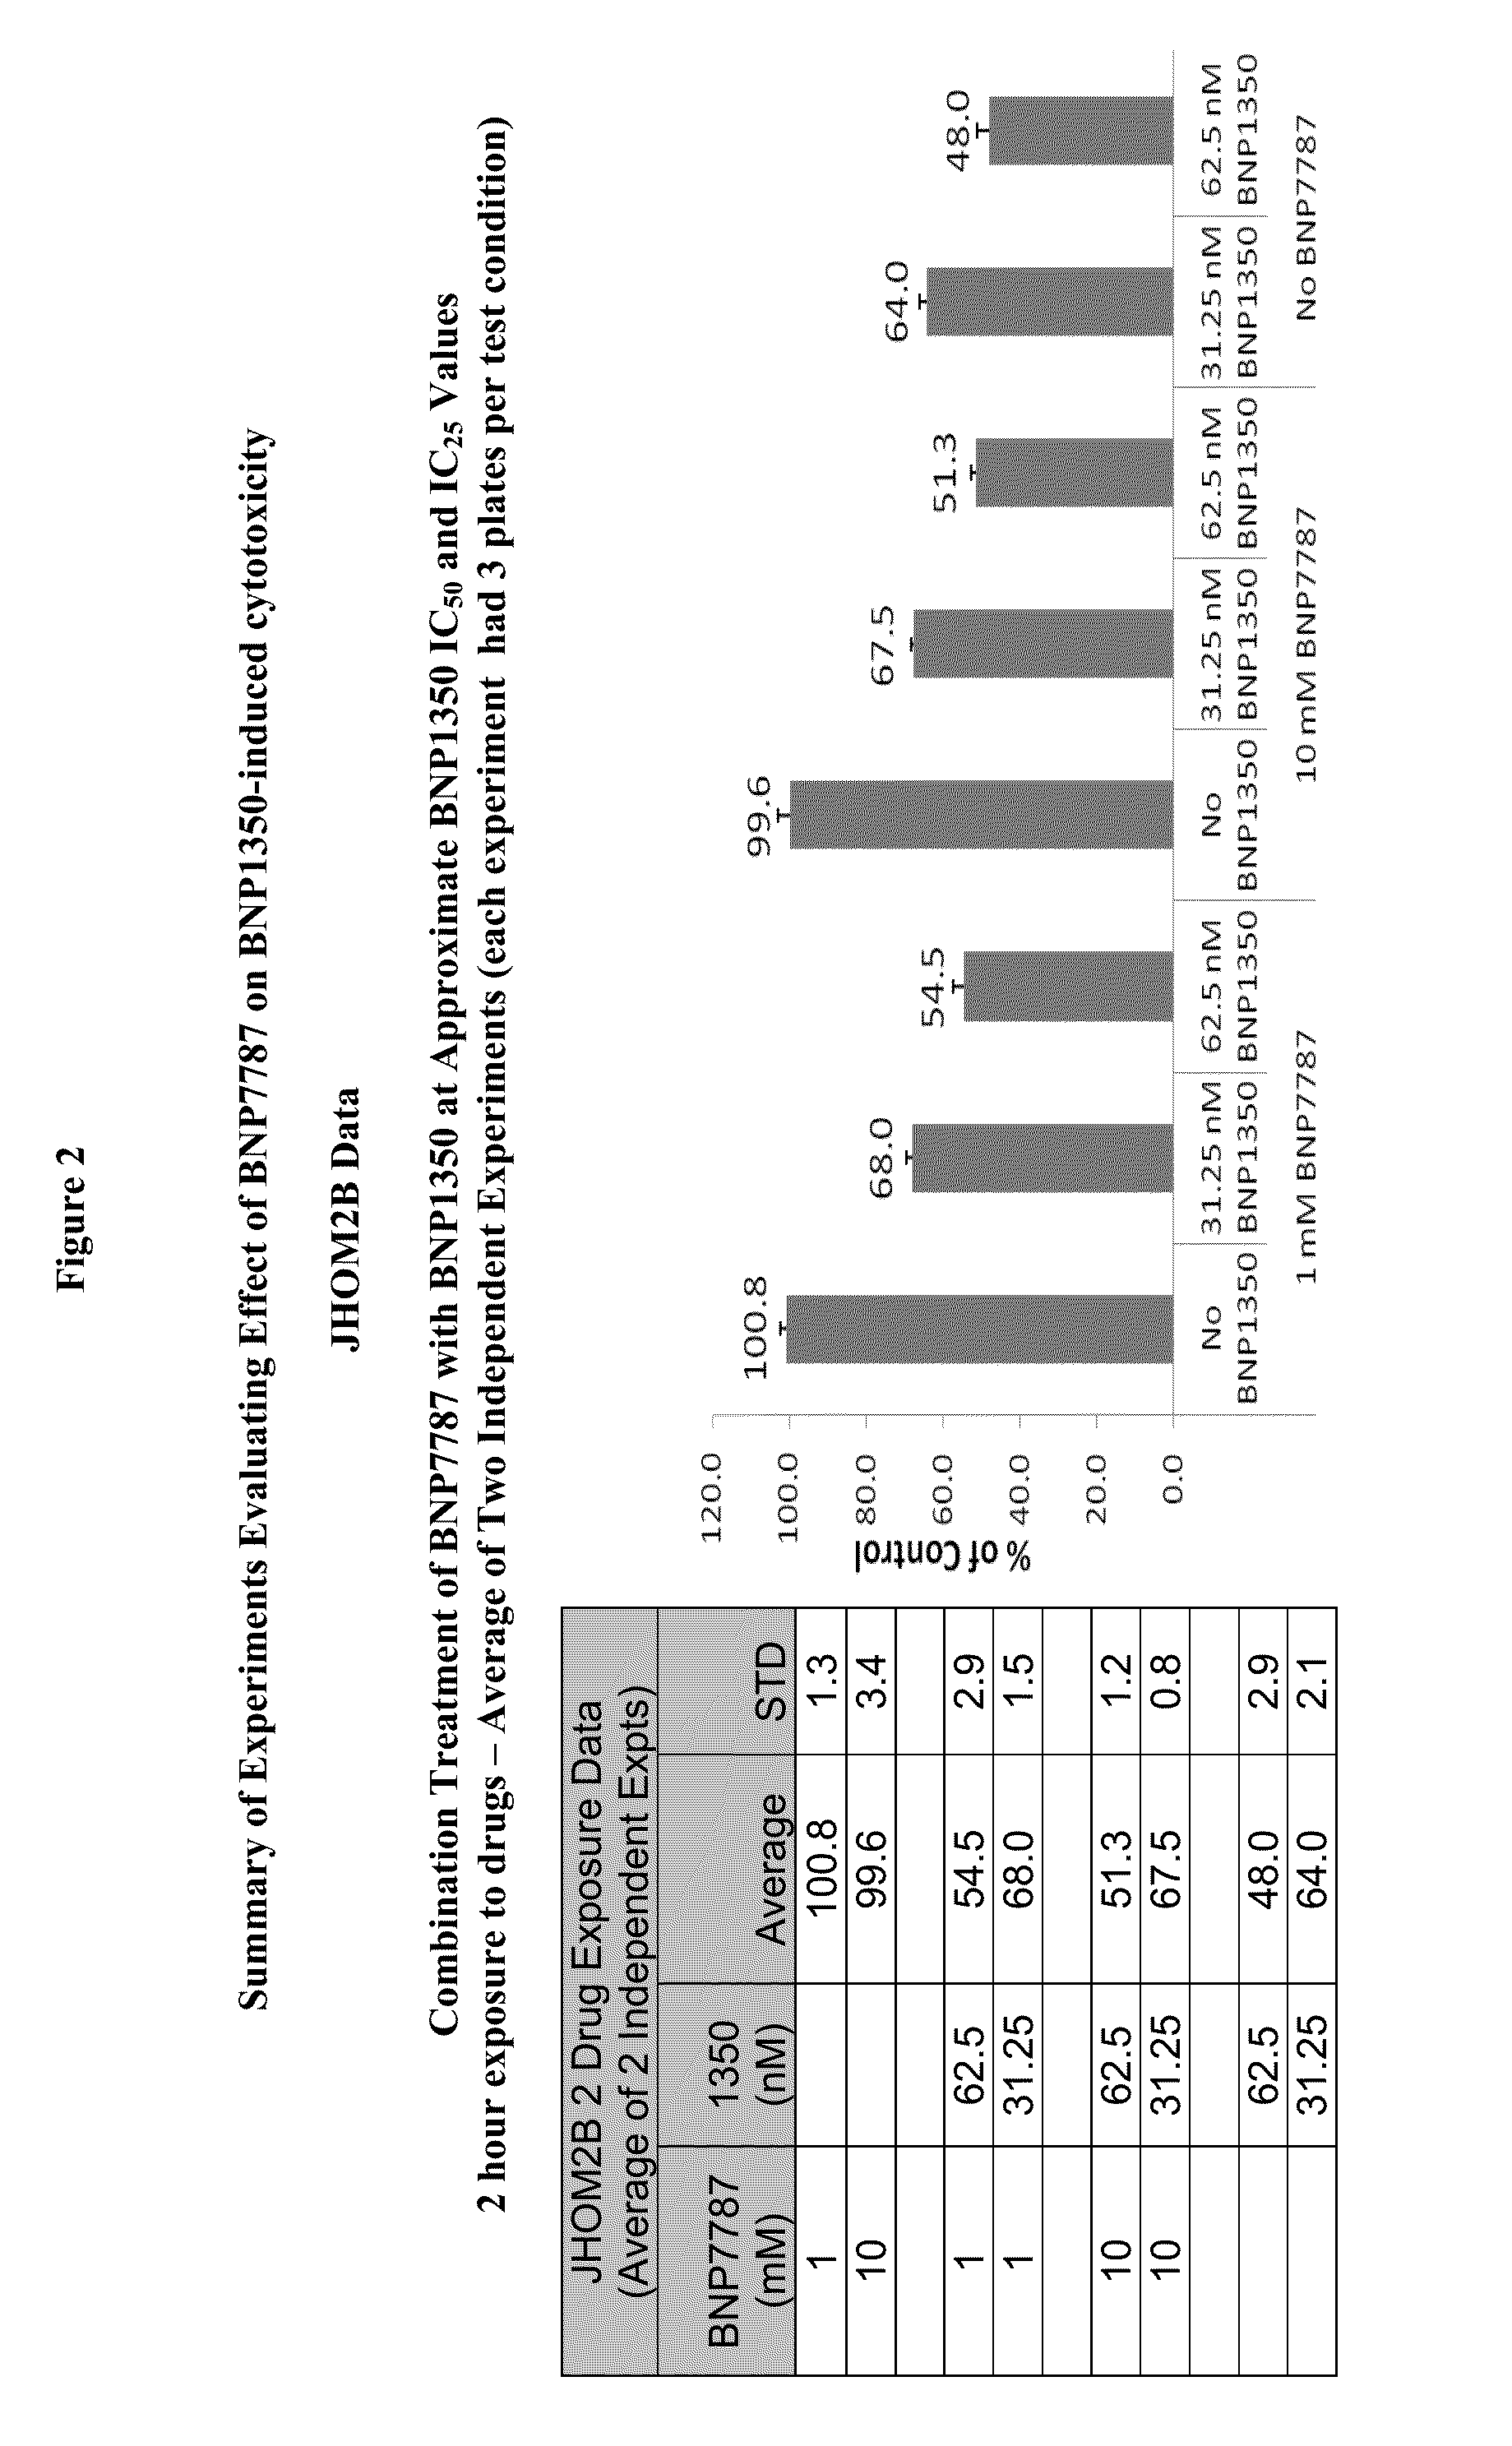 Administration of karenitecin for the treatment of advanced ovarian cancer, including chemotherapy-resistant and/or the mucinous adenocarcinoma sub-types